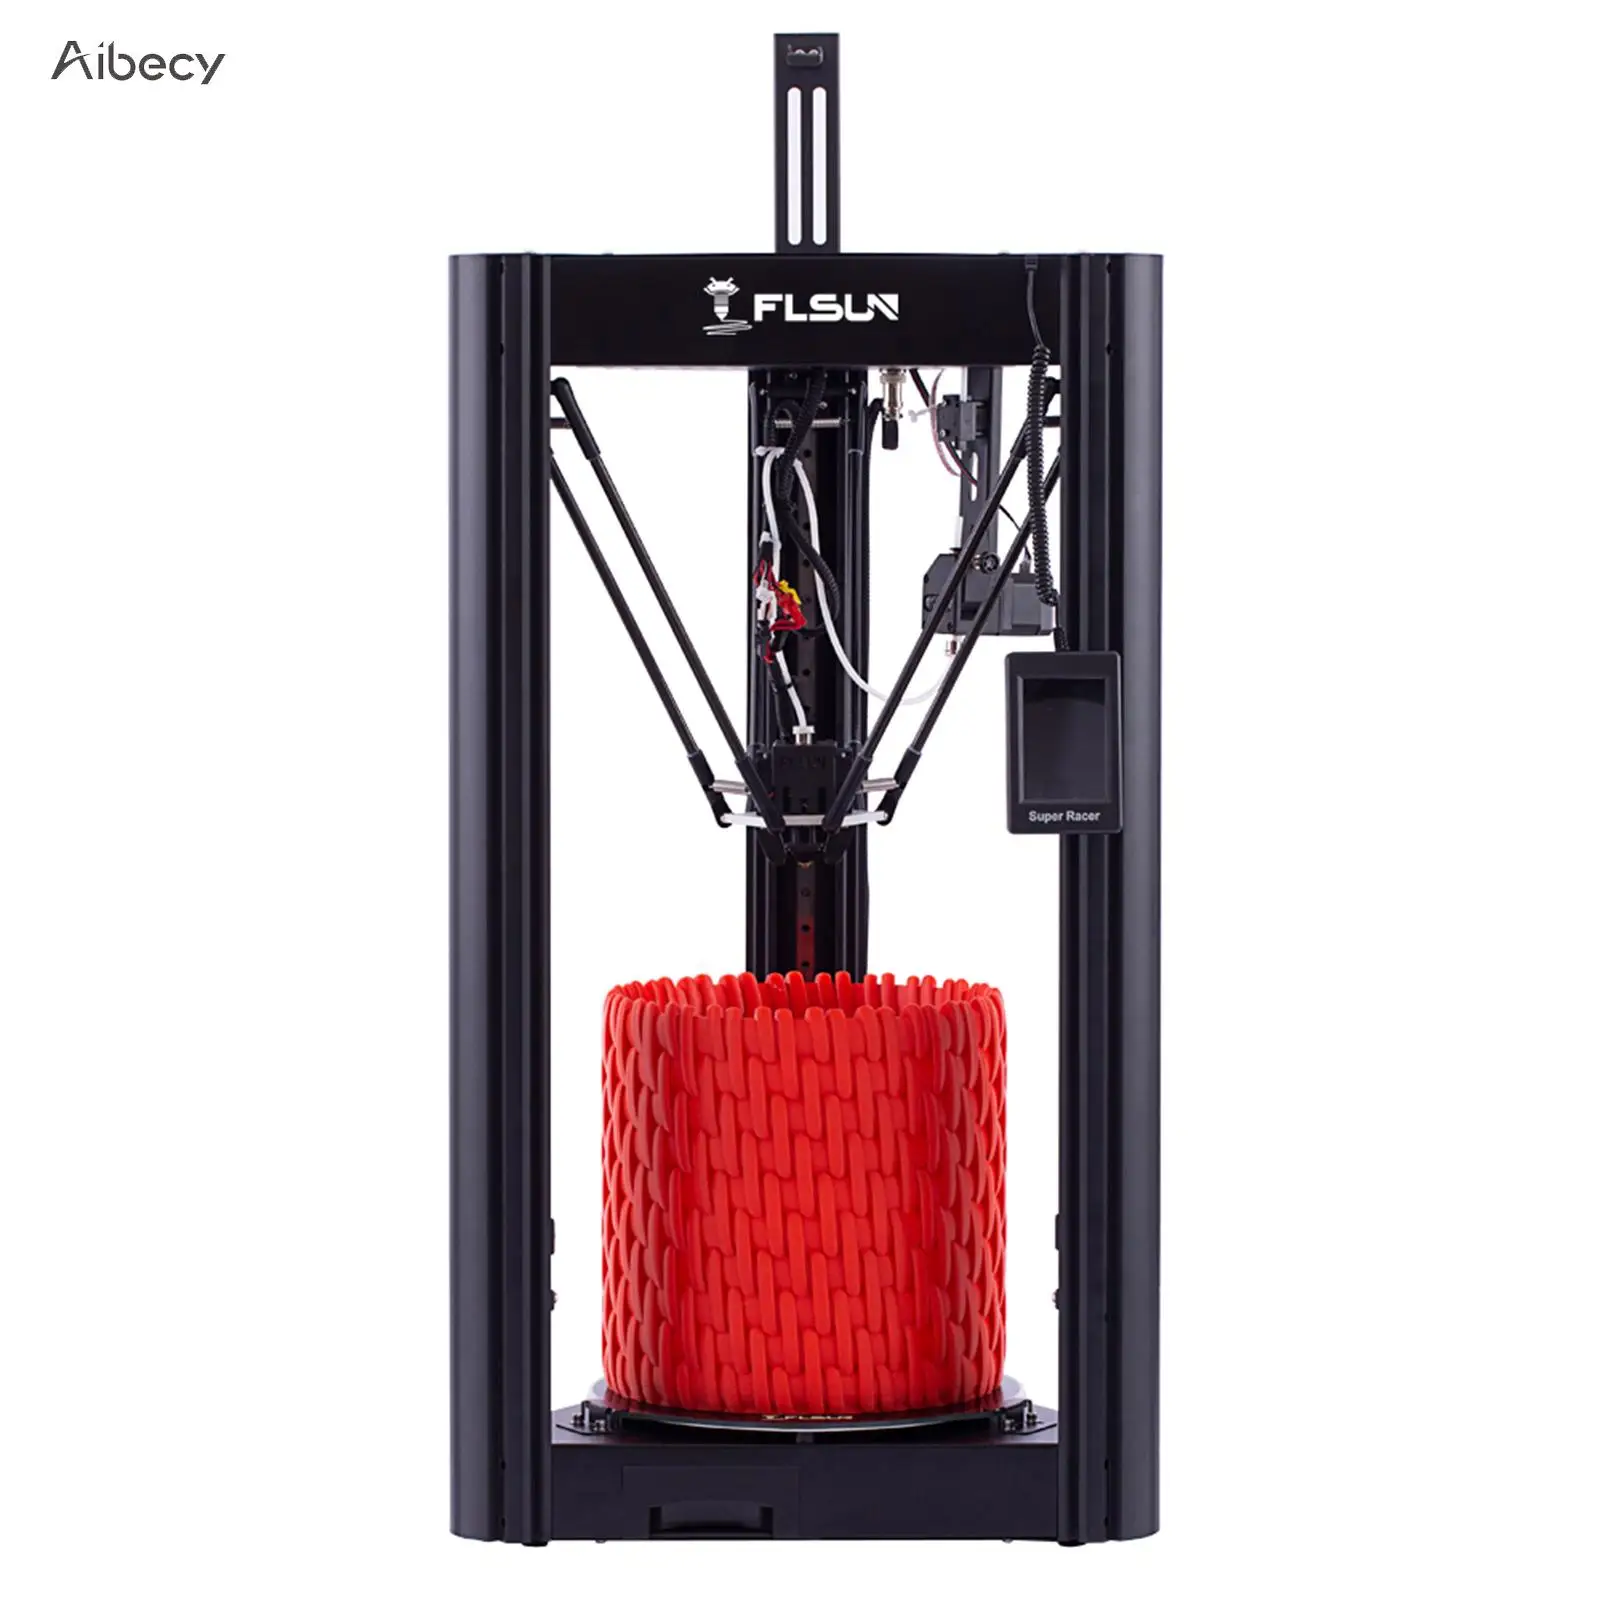 FLSUN SR Delta 3D High Speed Quick Assembly 260mmx330mm Printing Size Auto Leveling Printing Dual